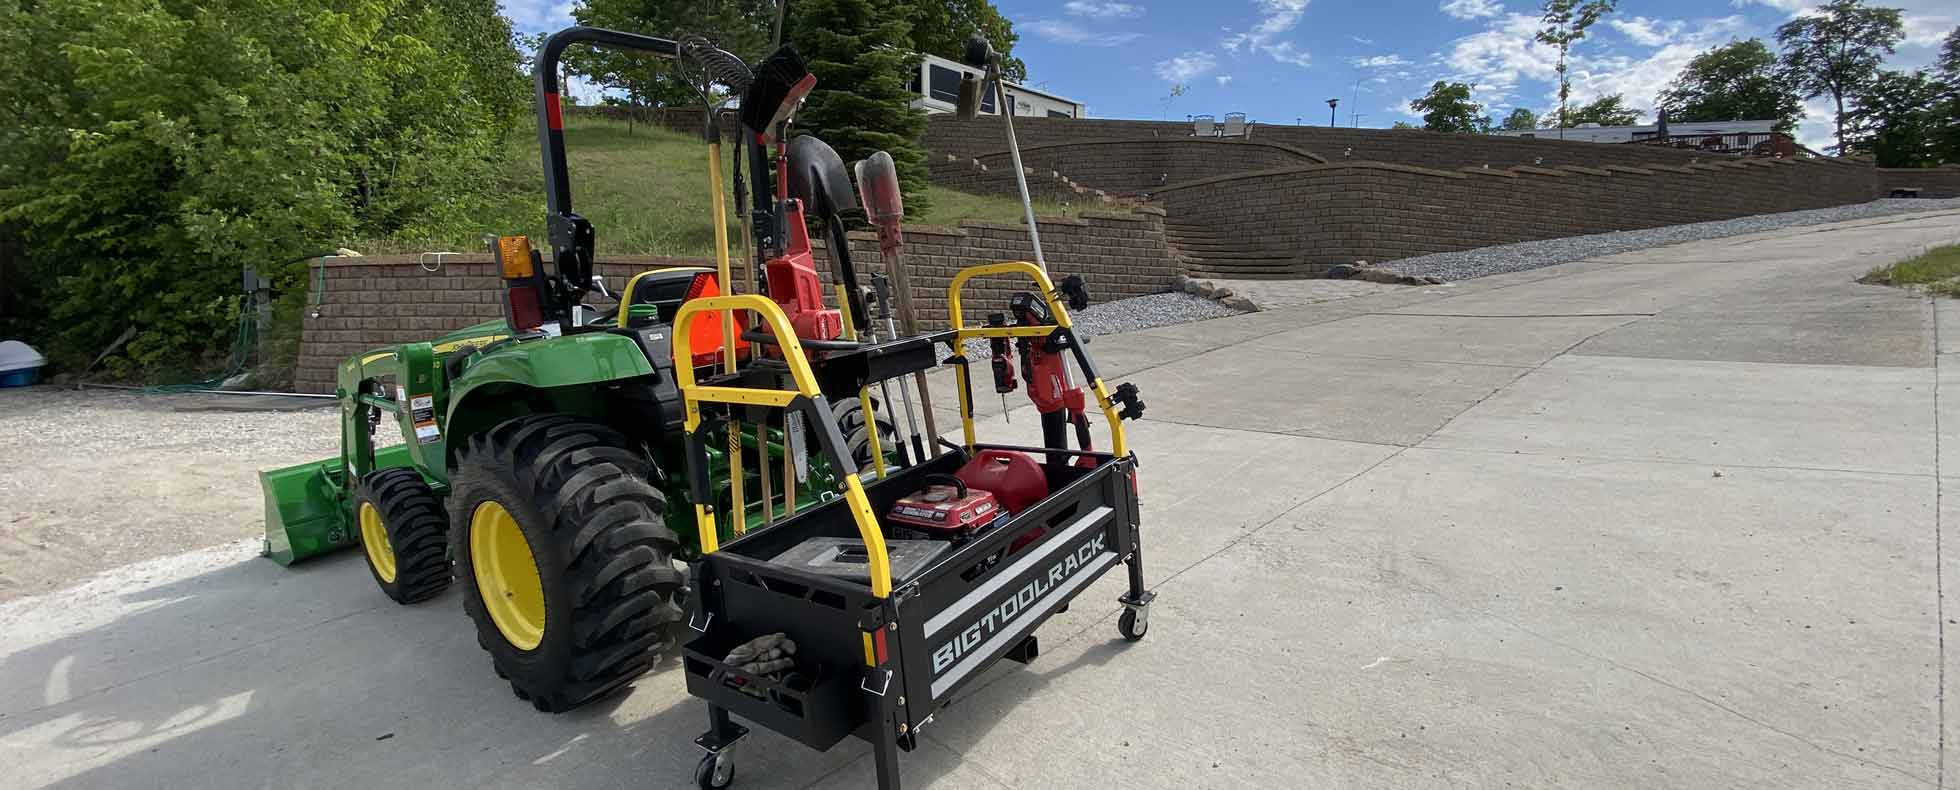 BigToolRack Offers Tractor Tool Storage Solution in a Mobile Tool Rack